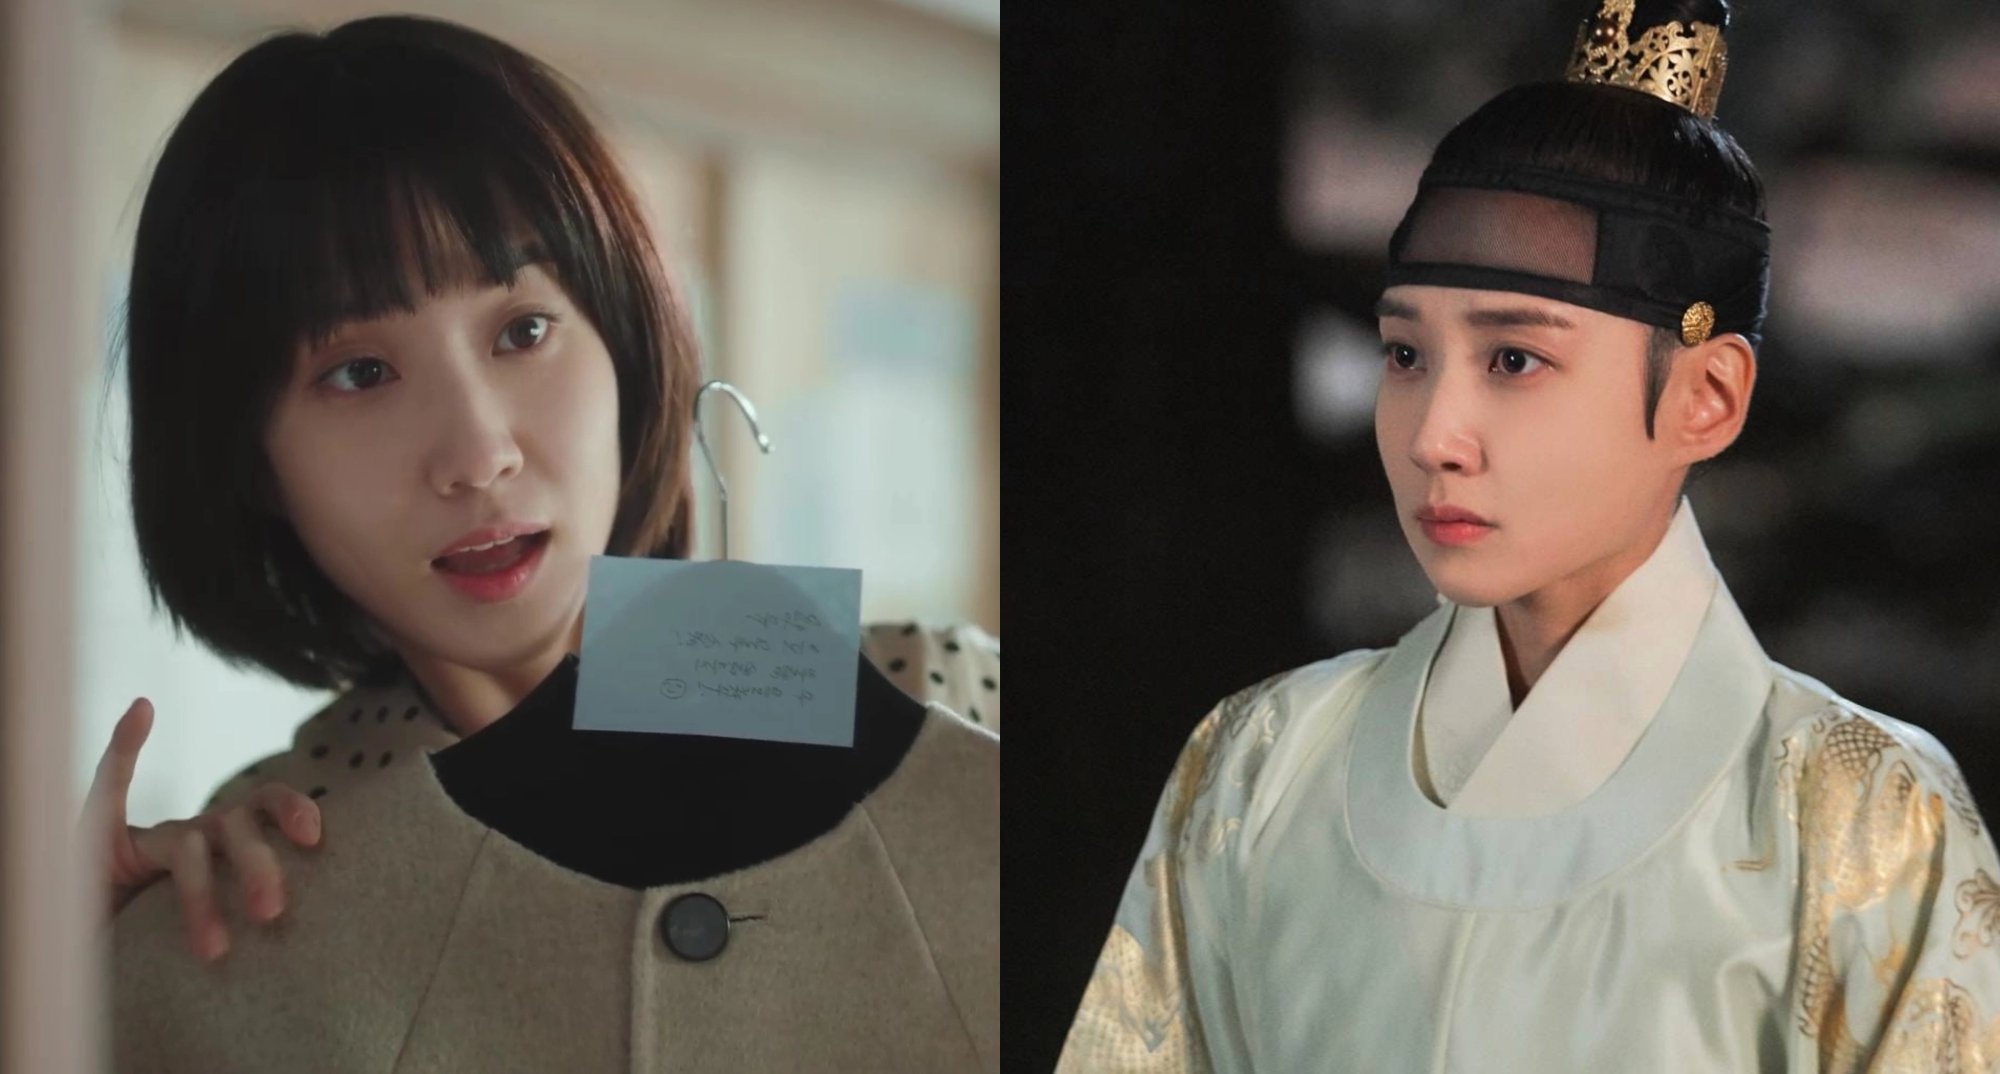 Park Eun-bin in K-dramas 'Extraordinary Attorney Woo' and 'The King's Affection'